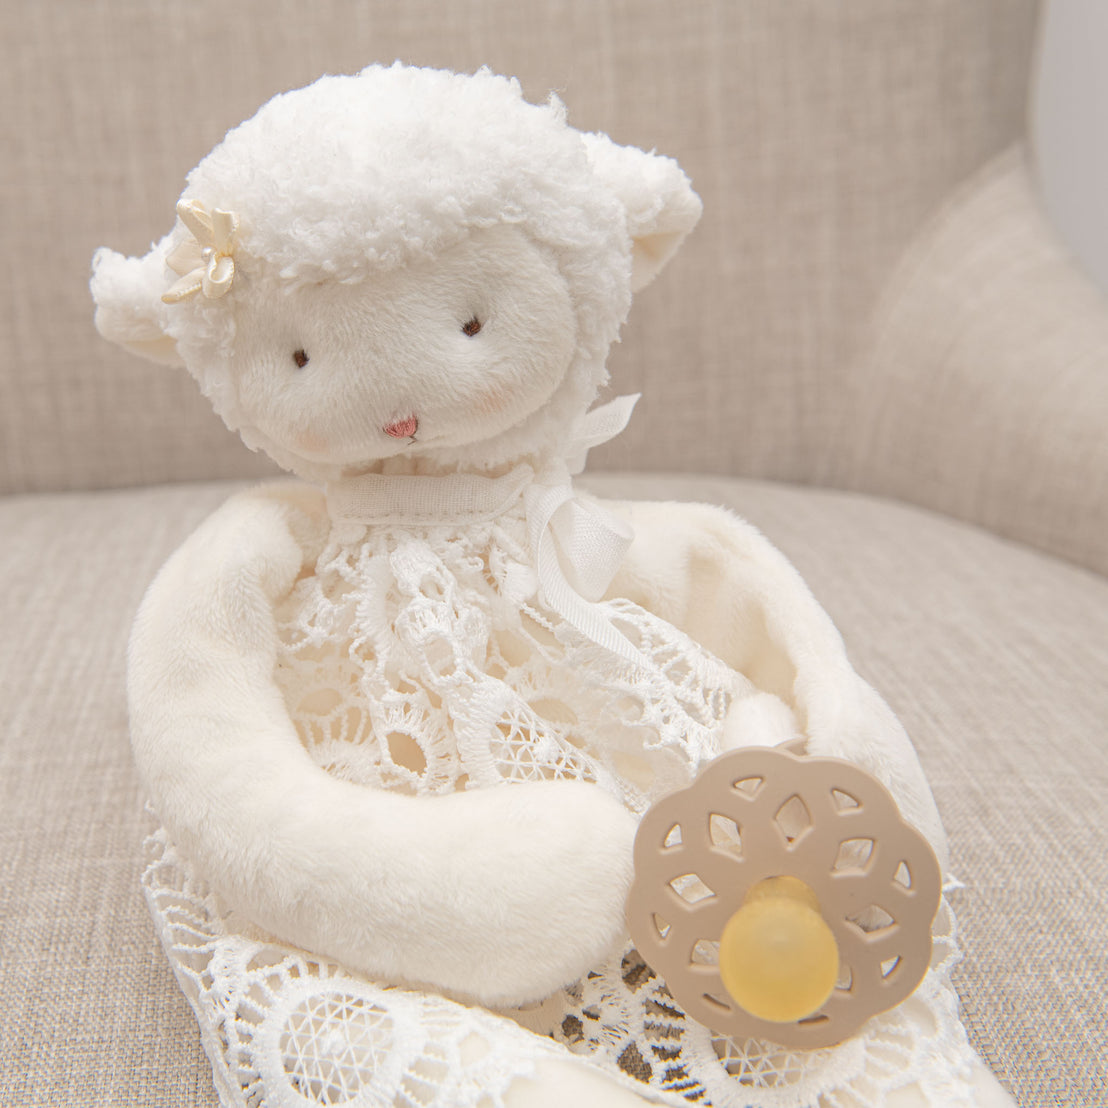 Baby lamb doll holding baby pacifier.